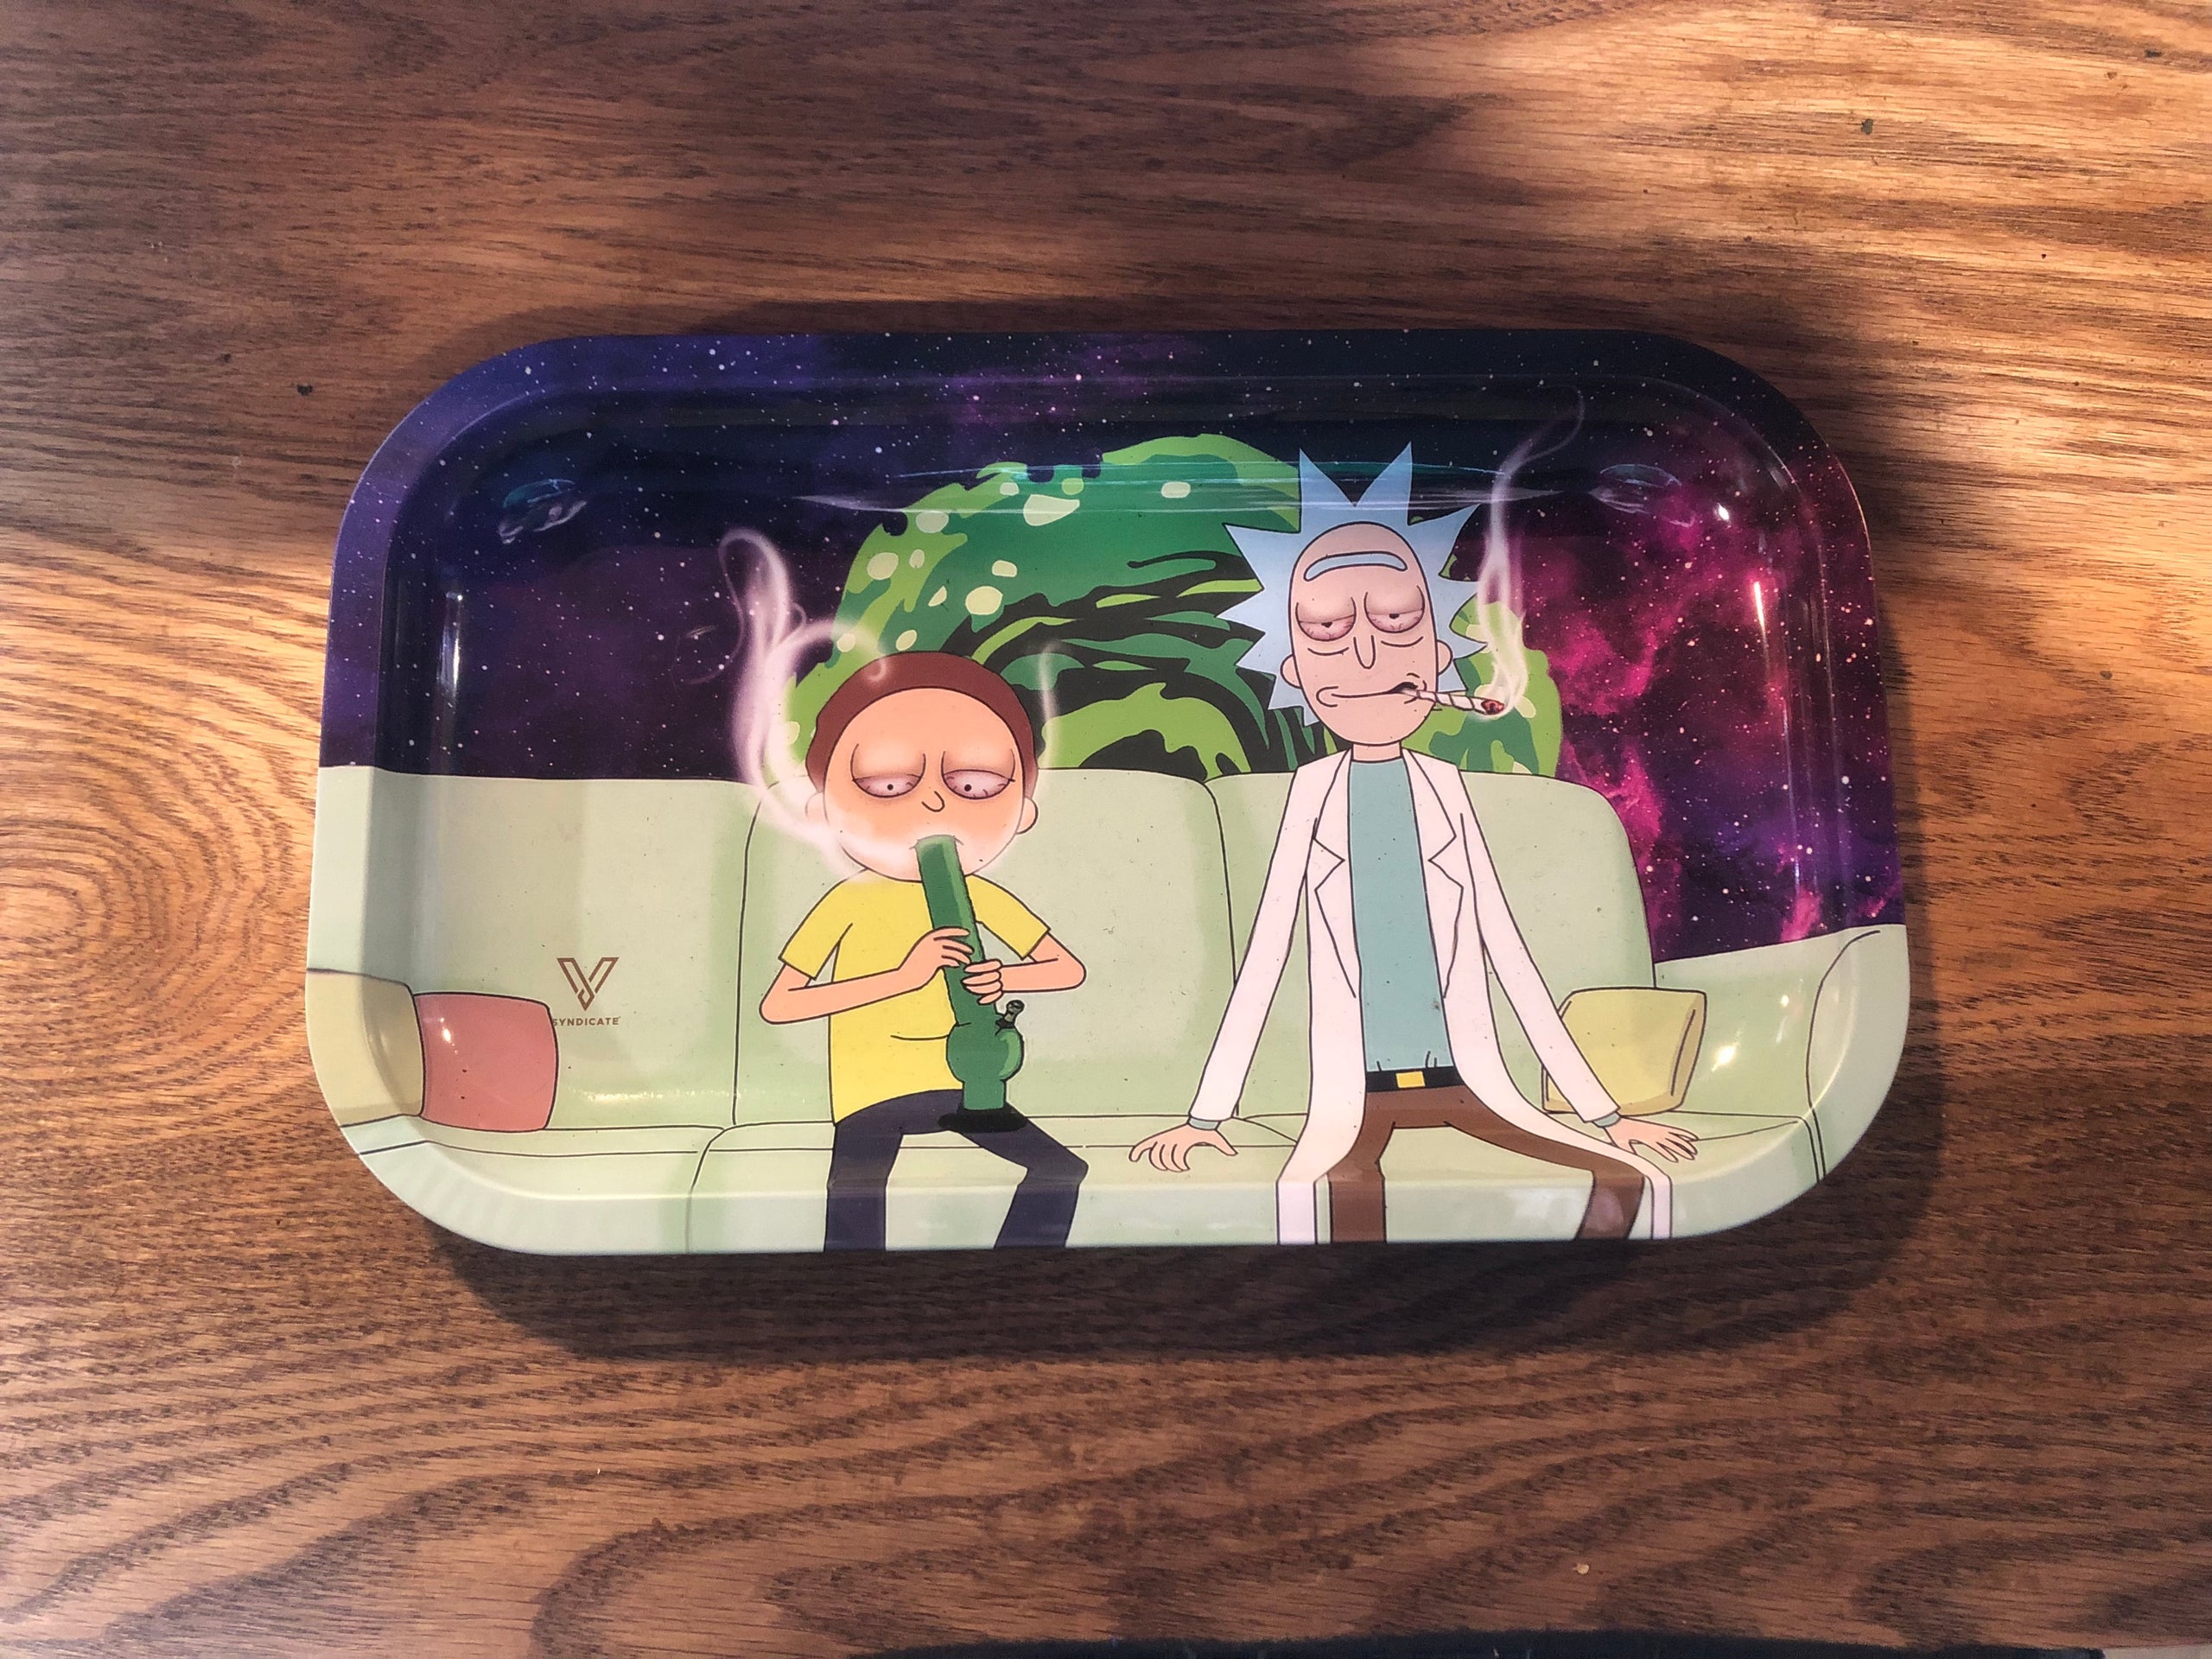 Tray Rick and Morty rolling tray - Buy Tray Liar at Pevgrow